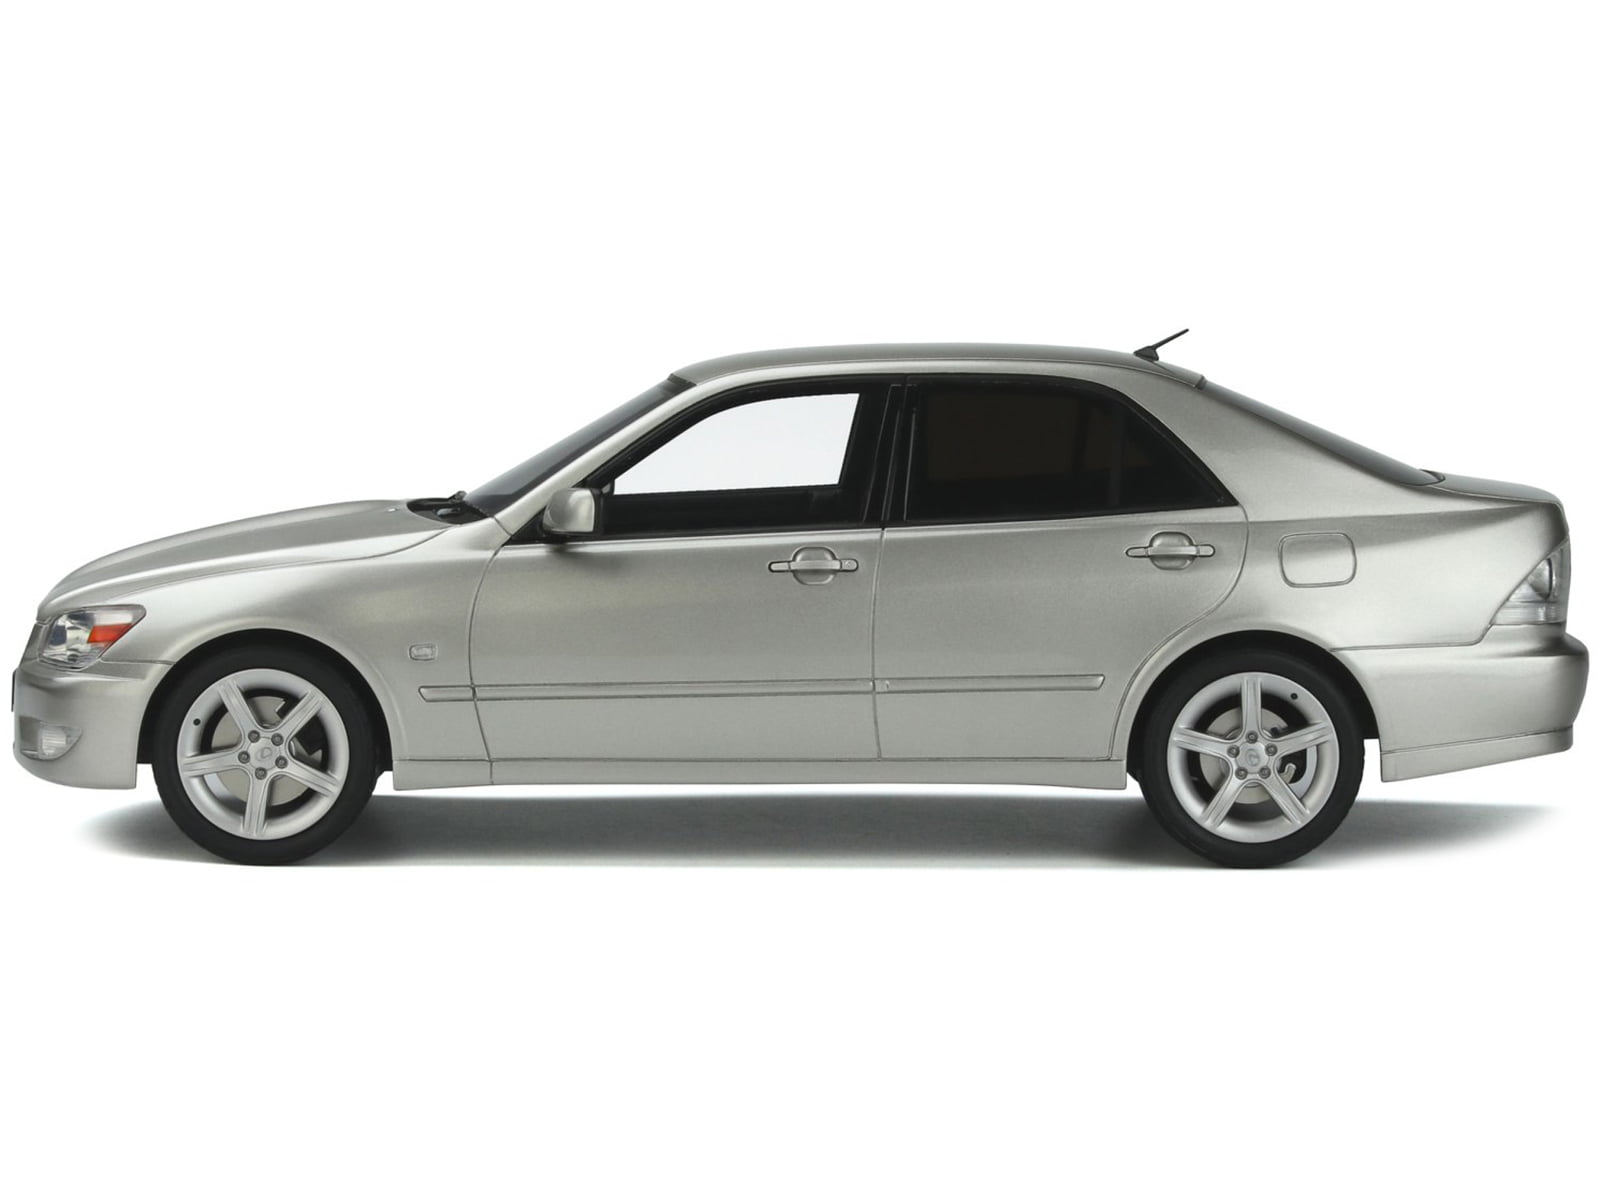 Diecast 1998 Lexus IS 200 RHD (Right Hand Drive) Millennium Silver Metallic  Limited Edition to 2000 pieces Worldwide 1/18 Model Car by Otto Mobile